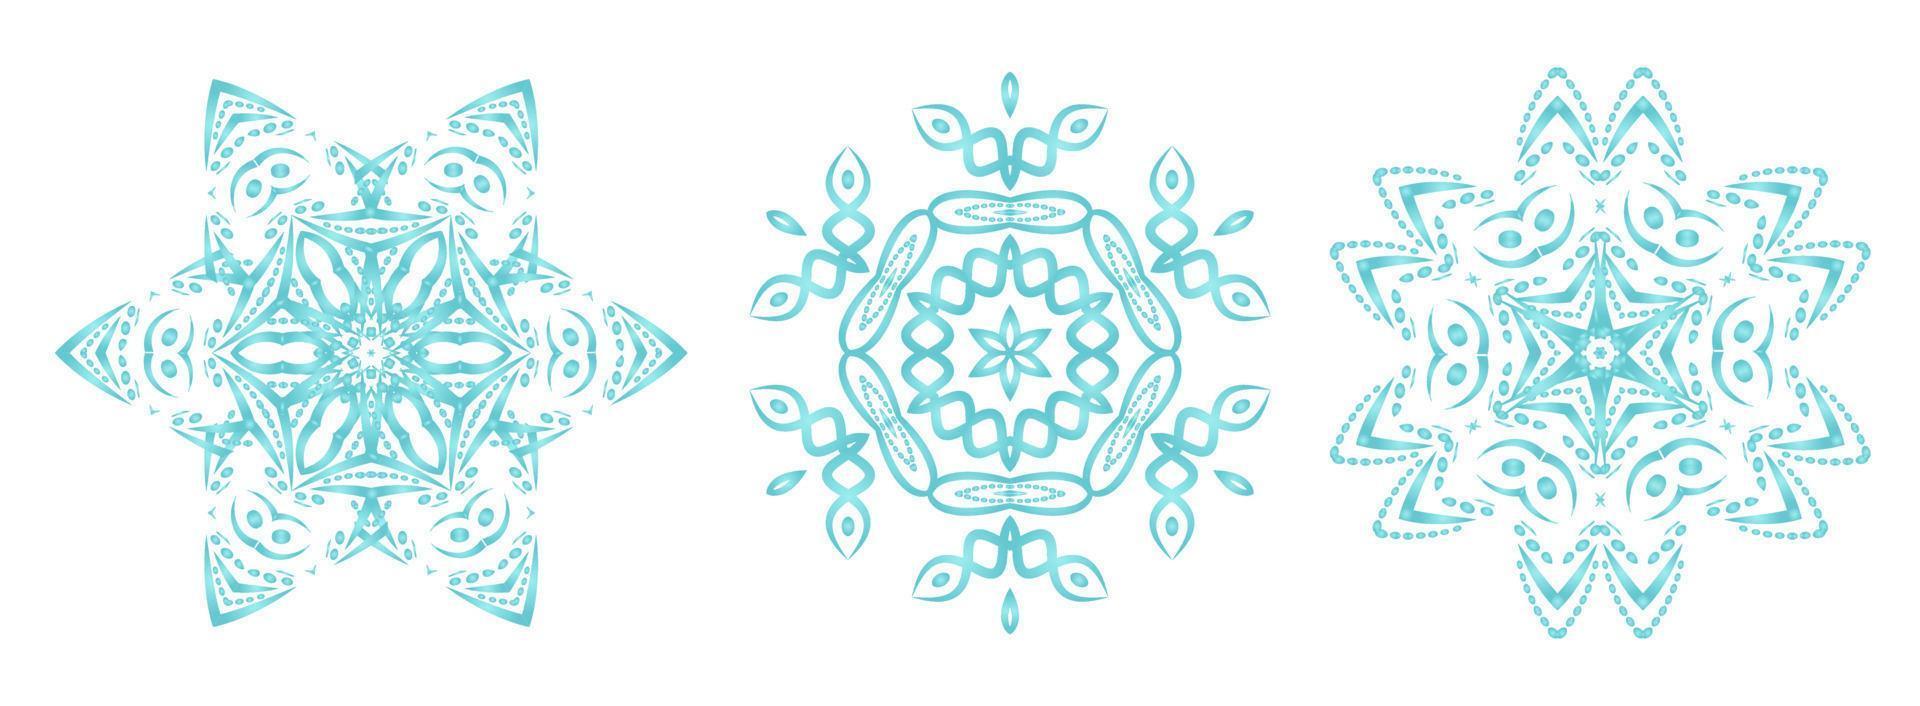 Set snowflakes in blue colors. Holiday decoration template. Isolated on white background. vector